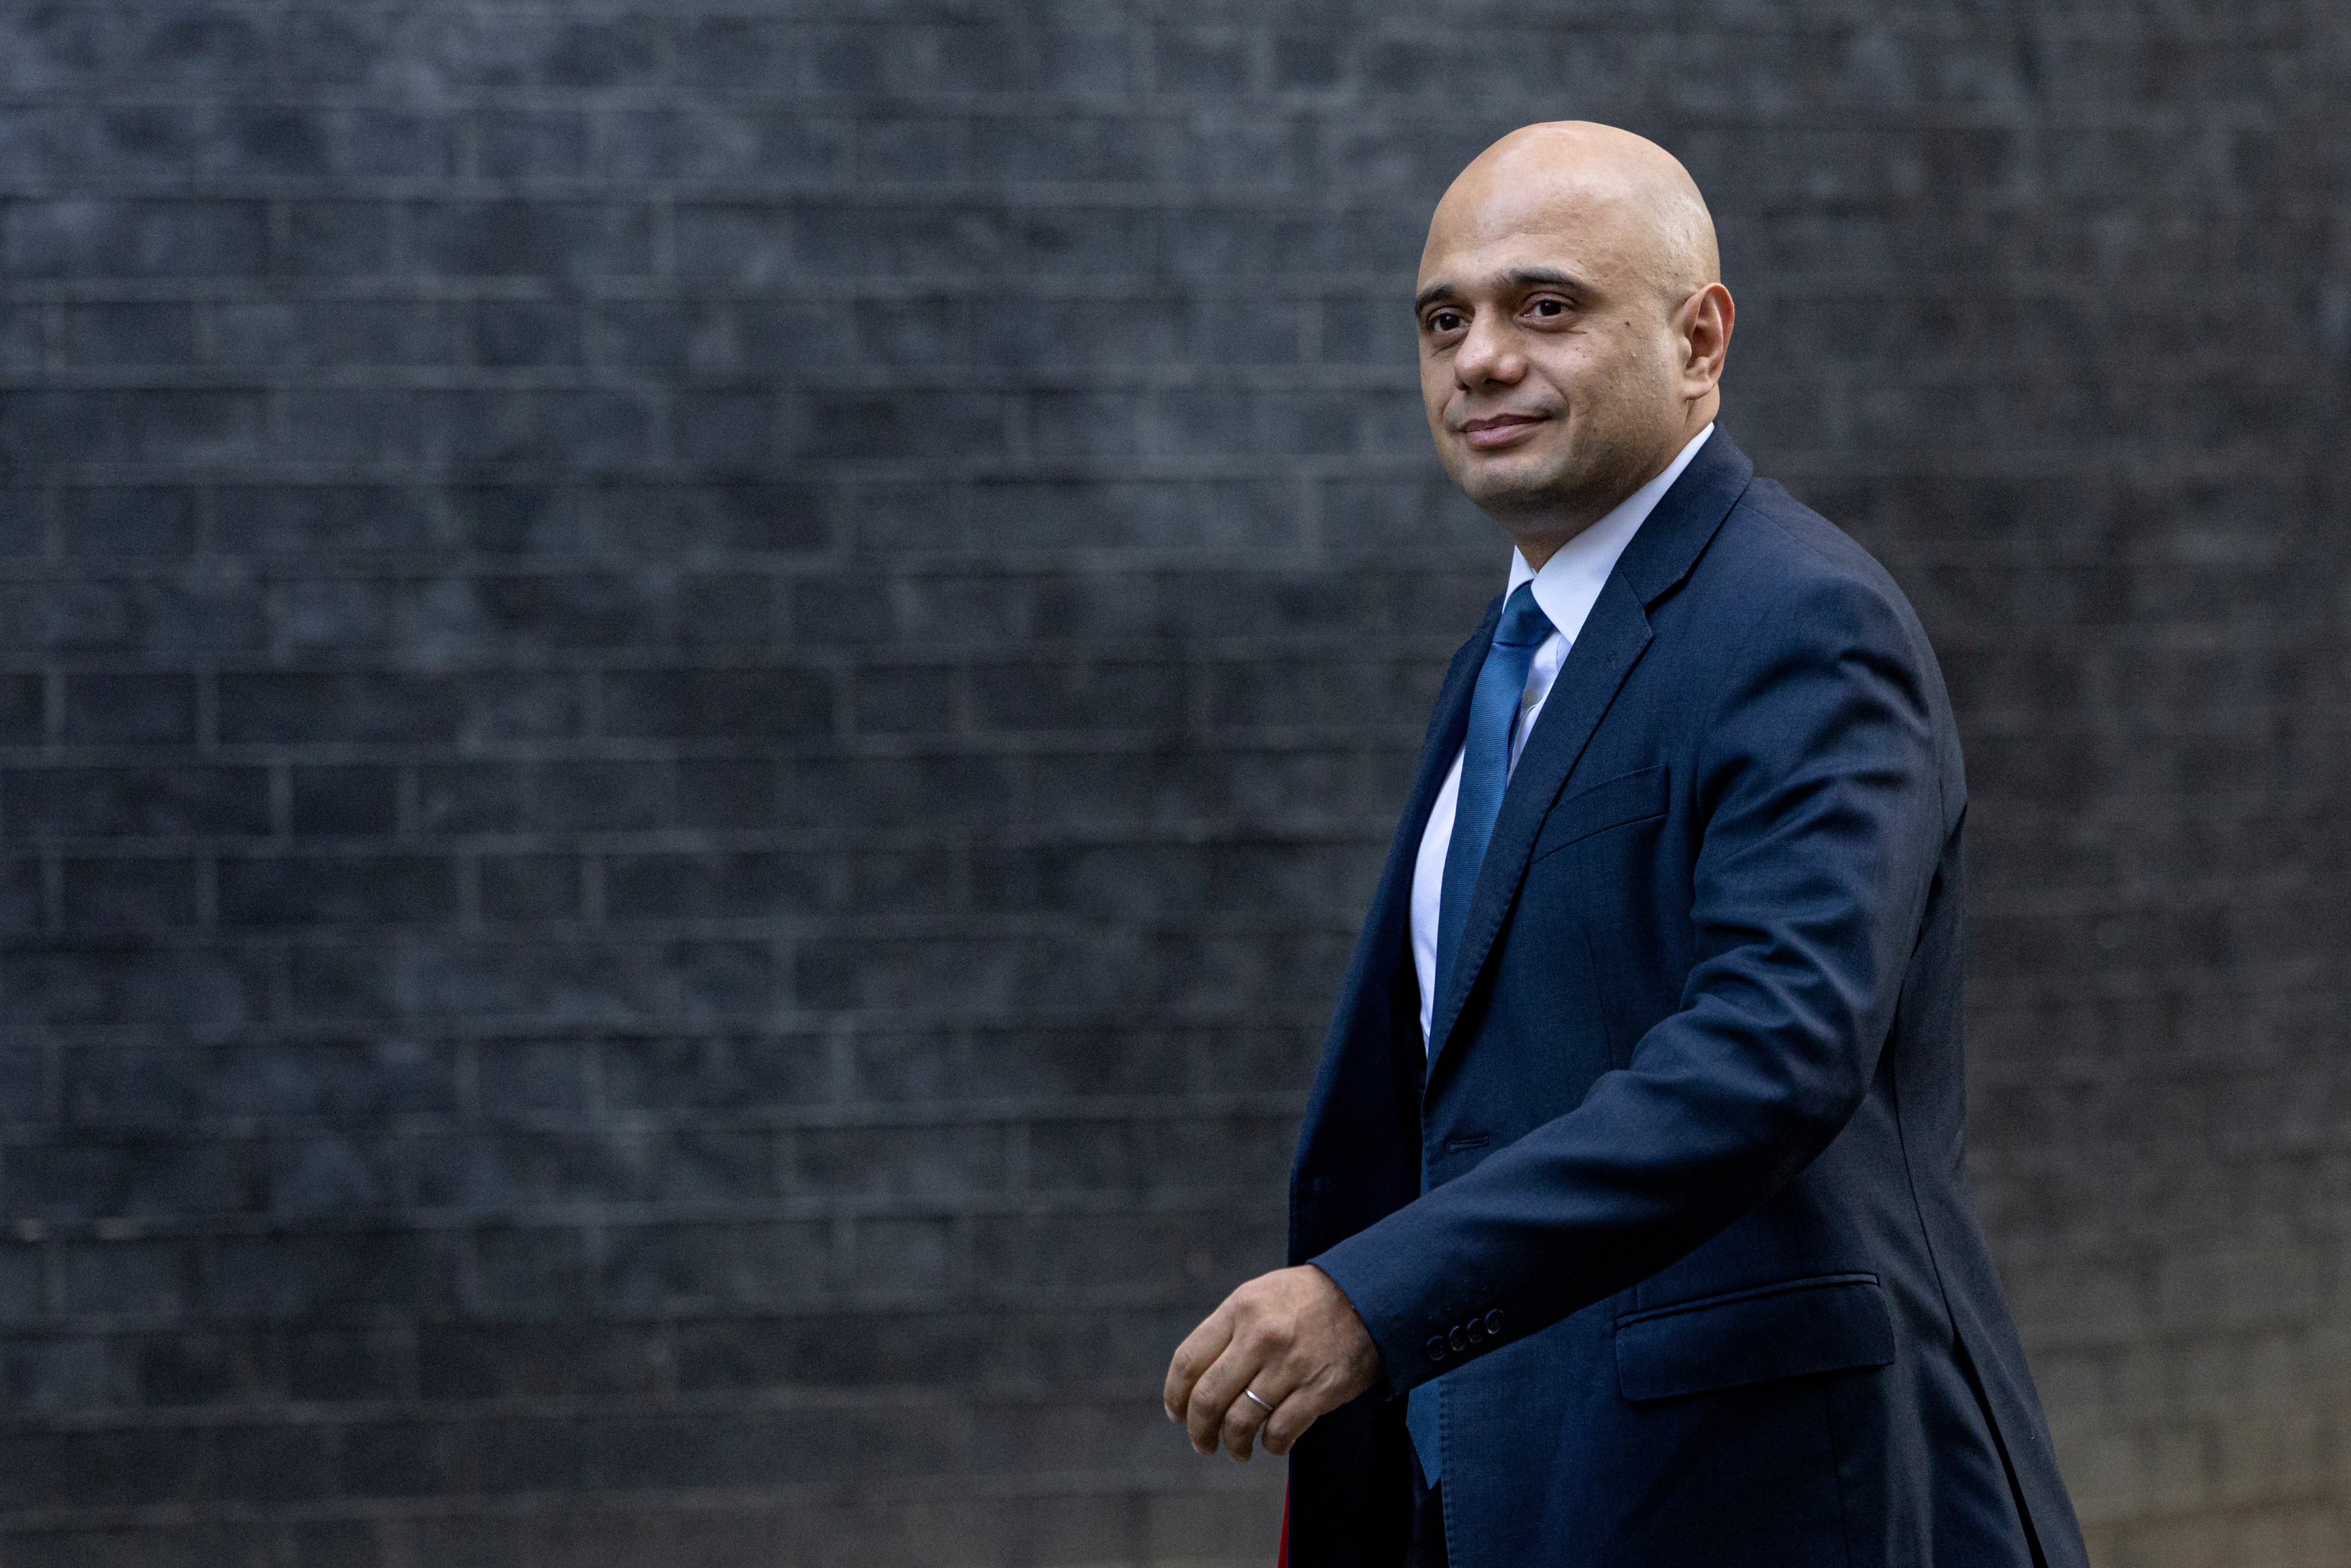 Mr Javid said that getting a booster vaccine would help ease pressure on the NHS